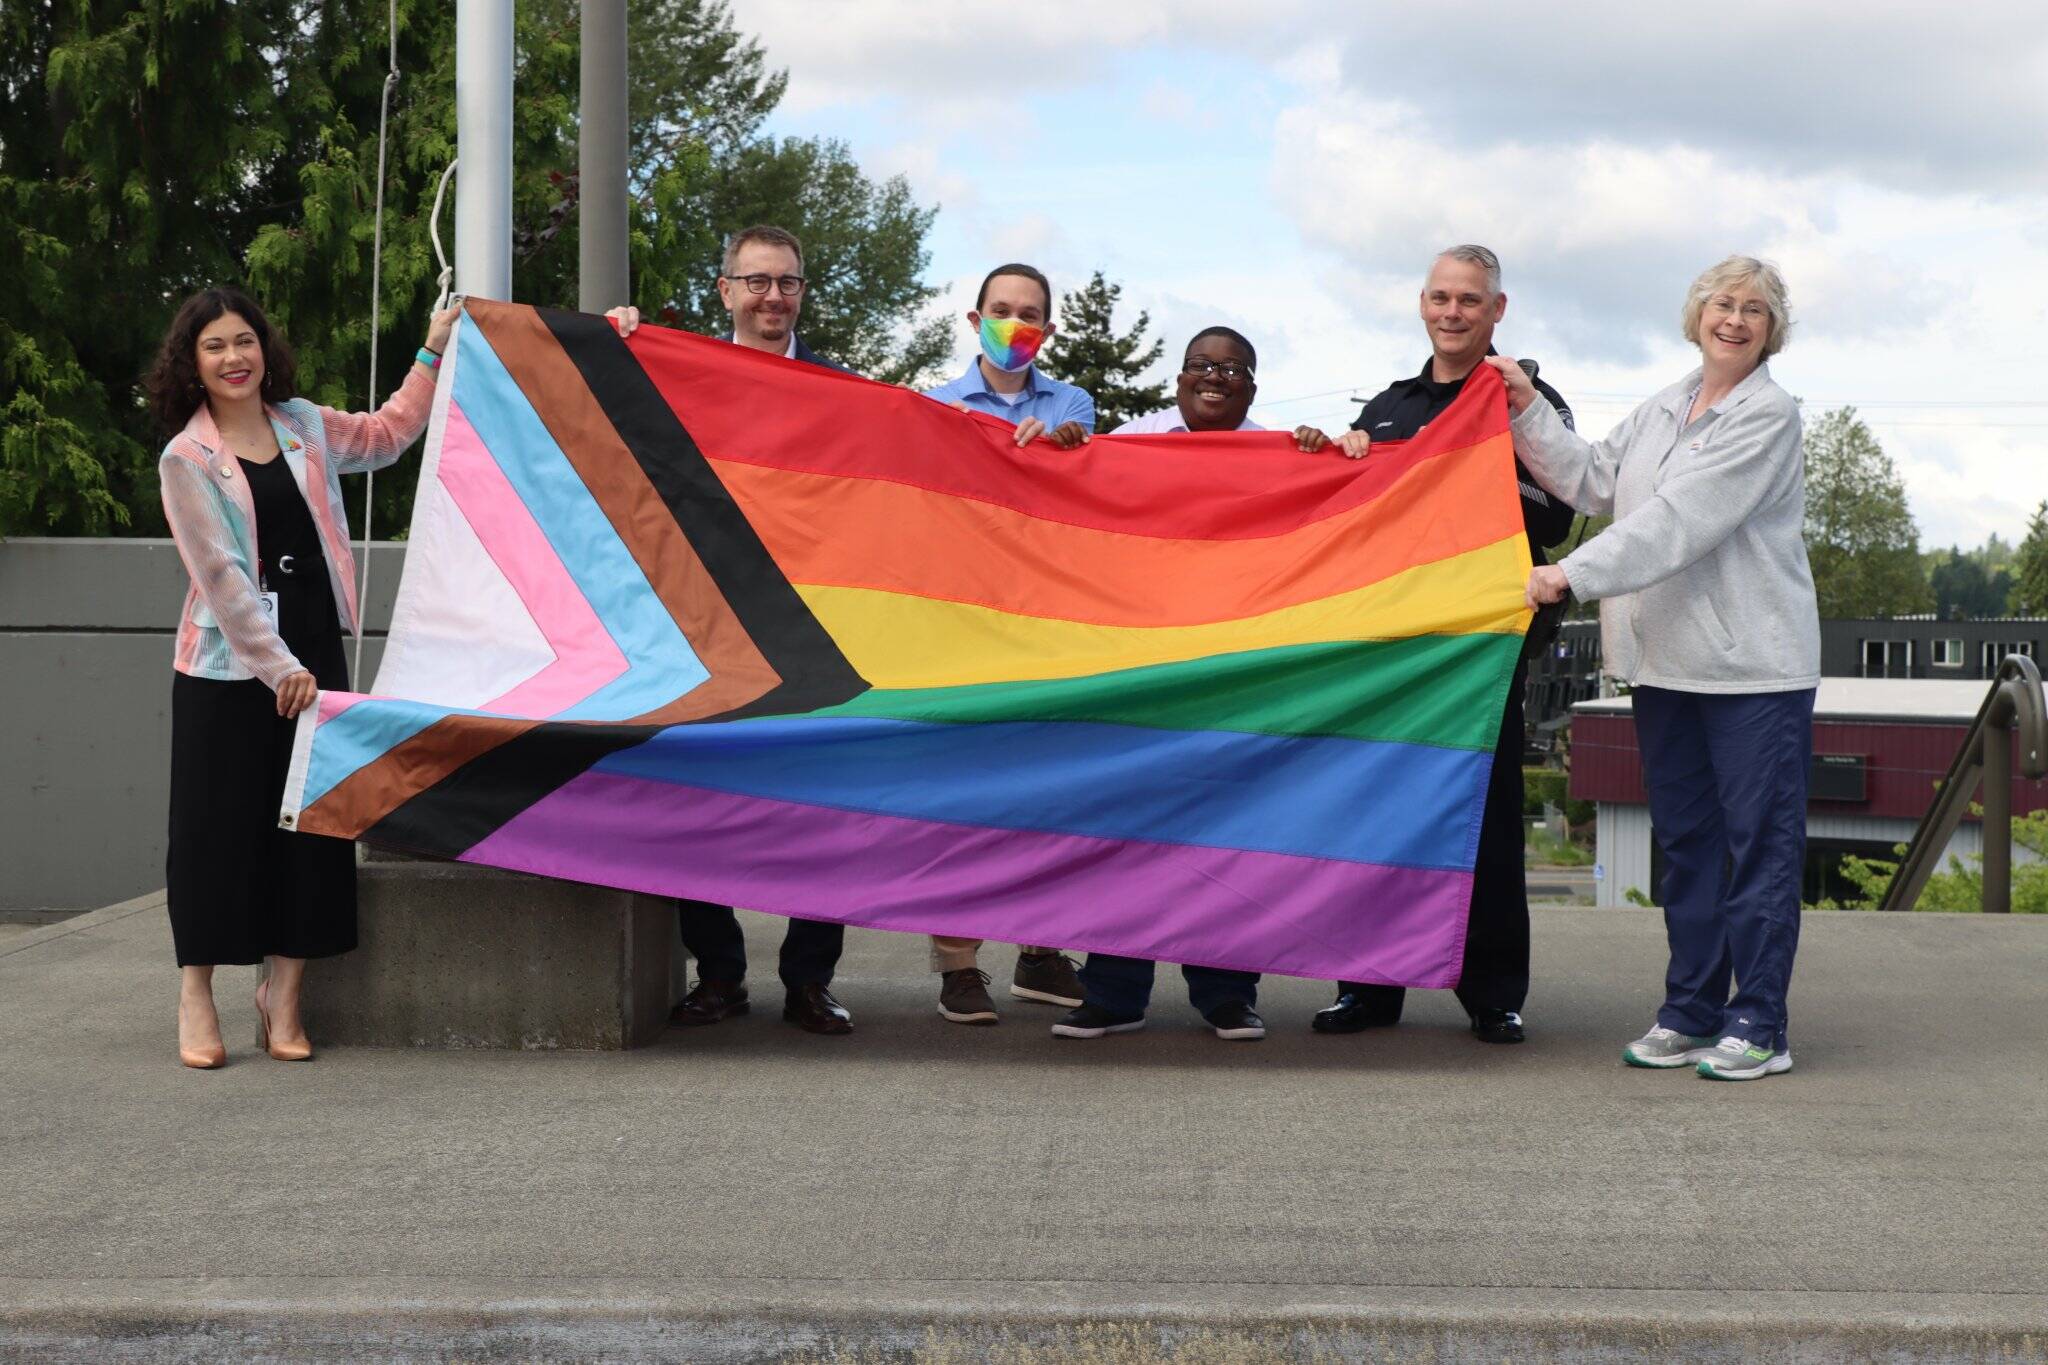 (From left to right) Renton City Councilmember Carmen Rivera, Mayor Armondo Pavone, Councilmember Ryan McIrvin, Councilmember Ed Prince, Police Chief Jon Schuldt and Councilmember Valerie O’Halloran hold the Progress Pride flag outside of City Hall. Photo courtesy of the City of Renton.